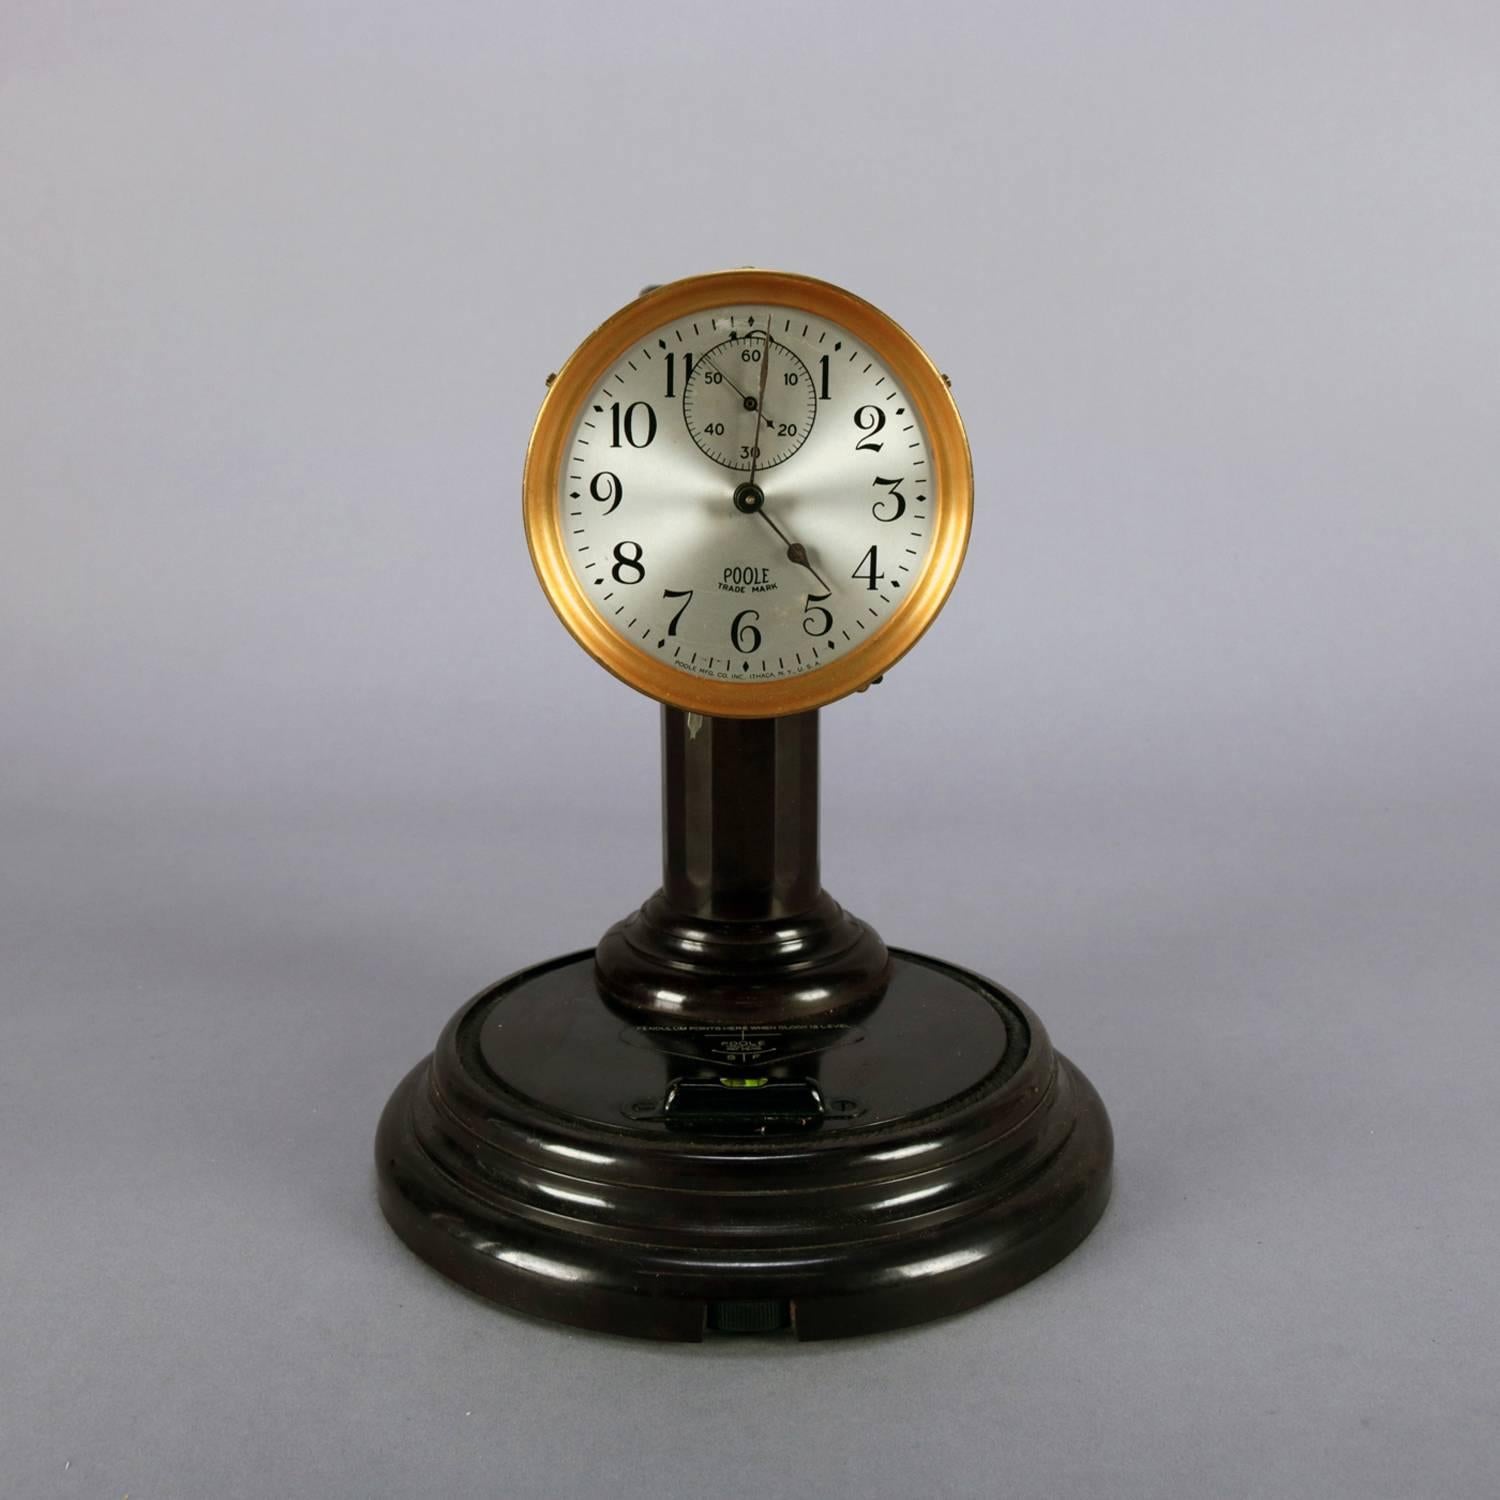 Poole Battery operated dome clock. Features 3.25 in. silvered dial with black Arabic hour numbers, Sub seconds dial, blued hands, brass bezel and signed on face “Poole Mfg. Co. Inc. Ithaca, NY, U.S.A.”; brass movement with pendulum running on